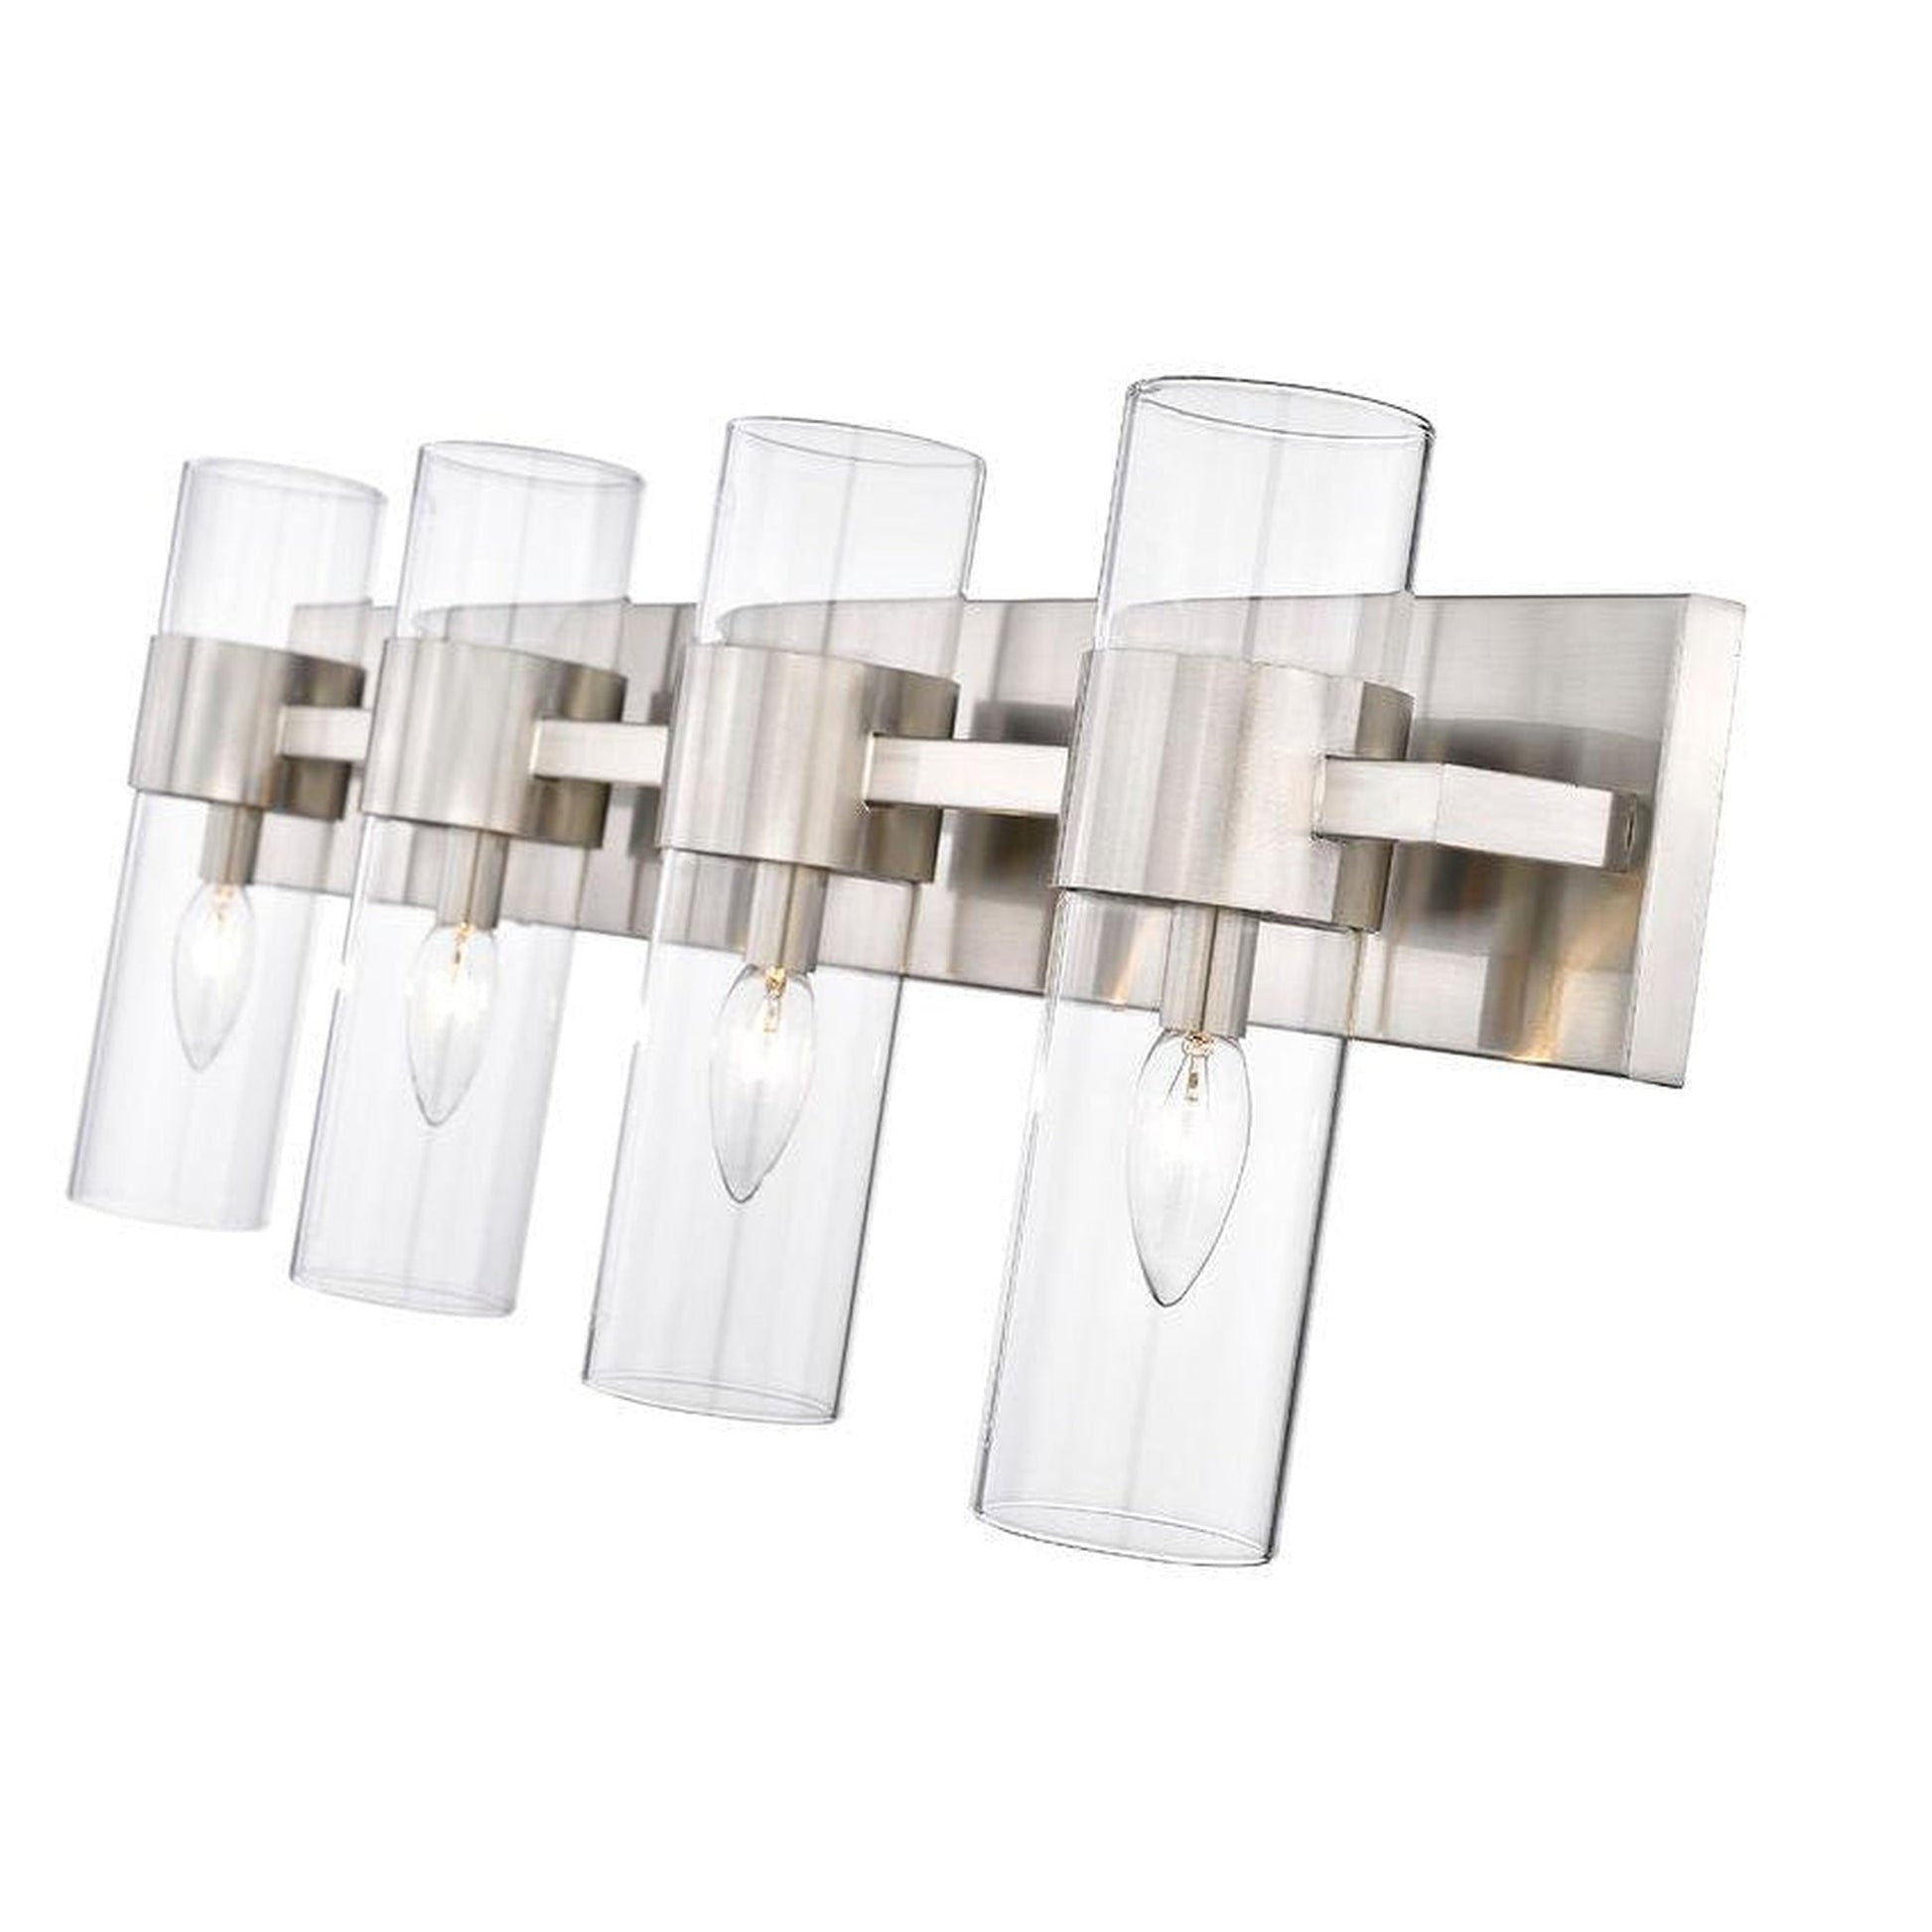 Z-Lite Lawson 32" 4-Light Brushed Nickel Vanity Light With Clear Glass Shade